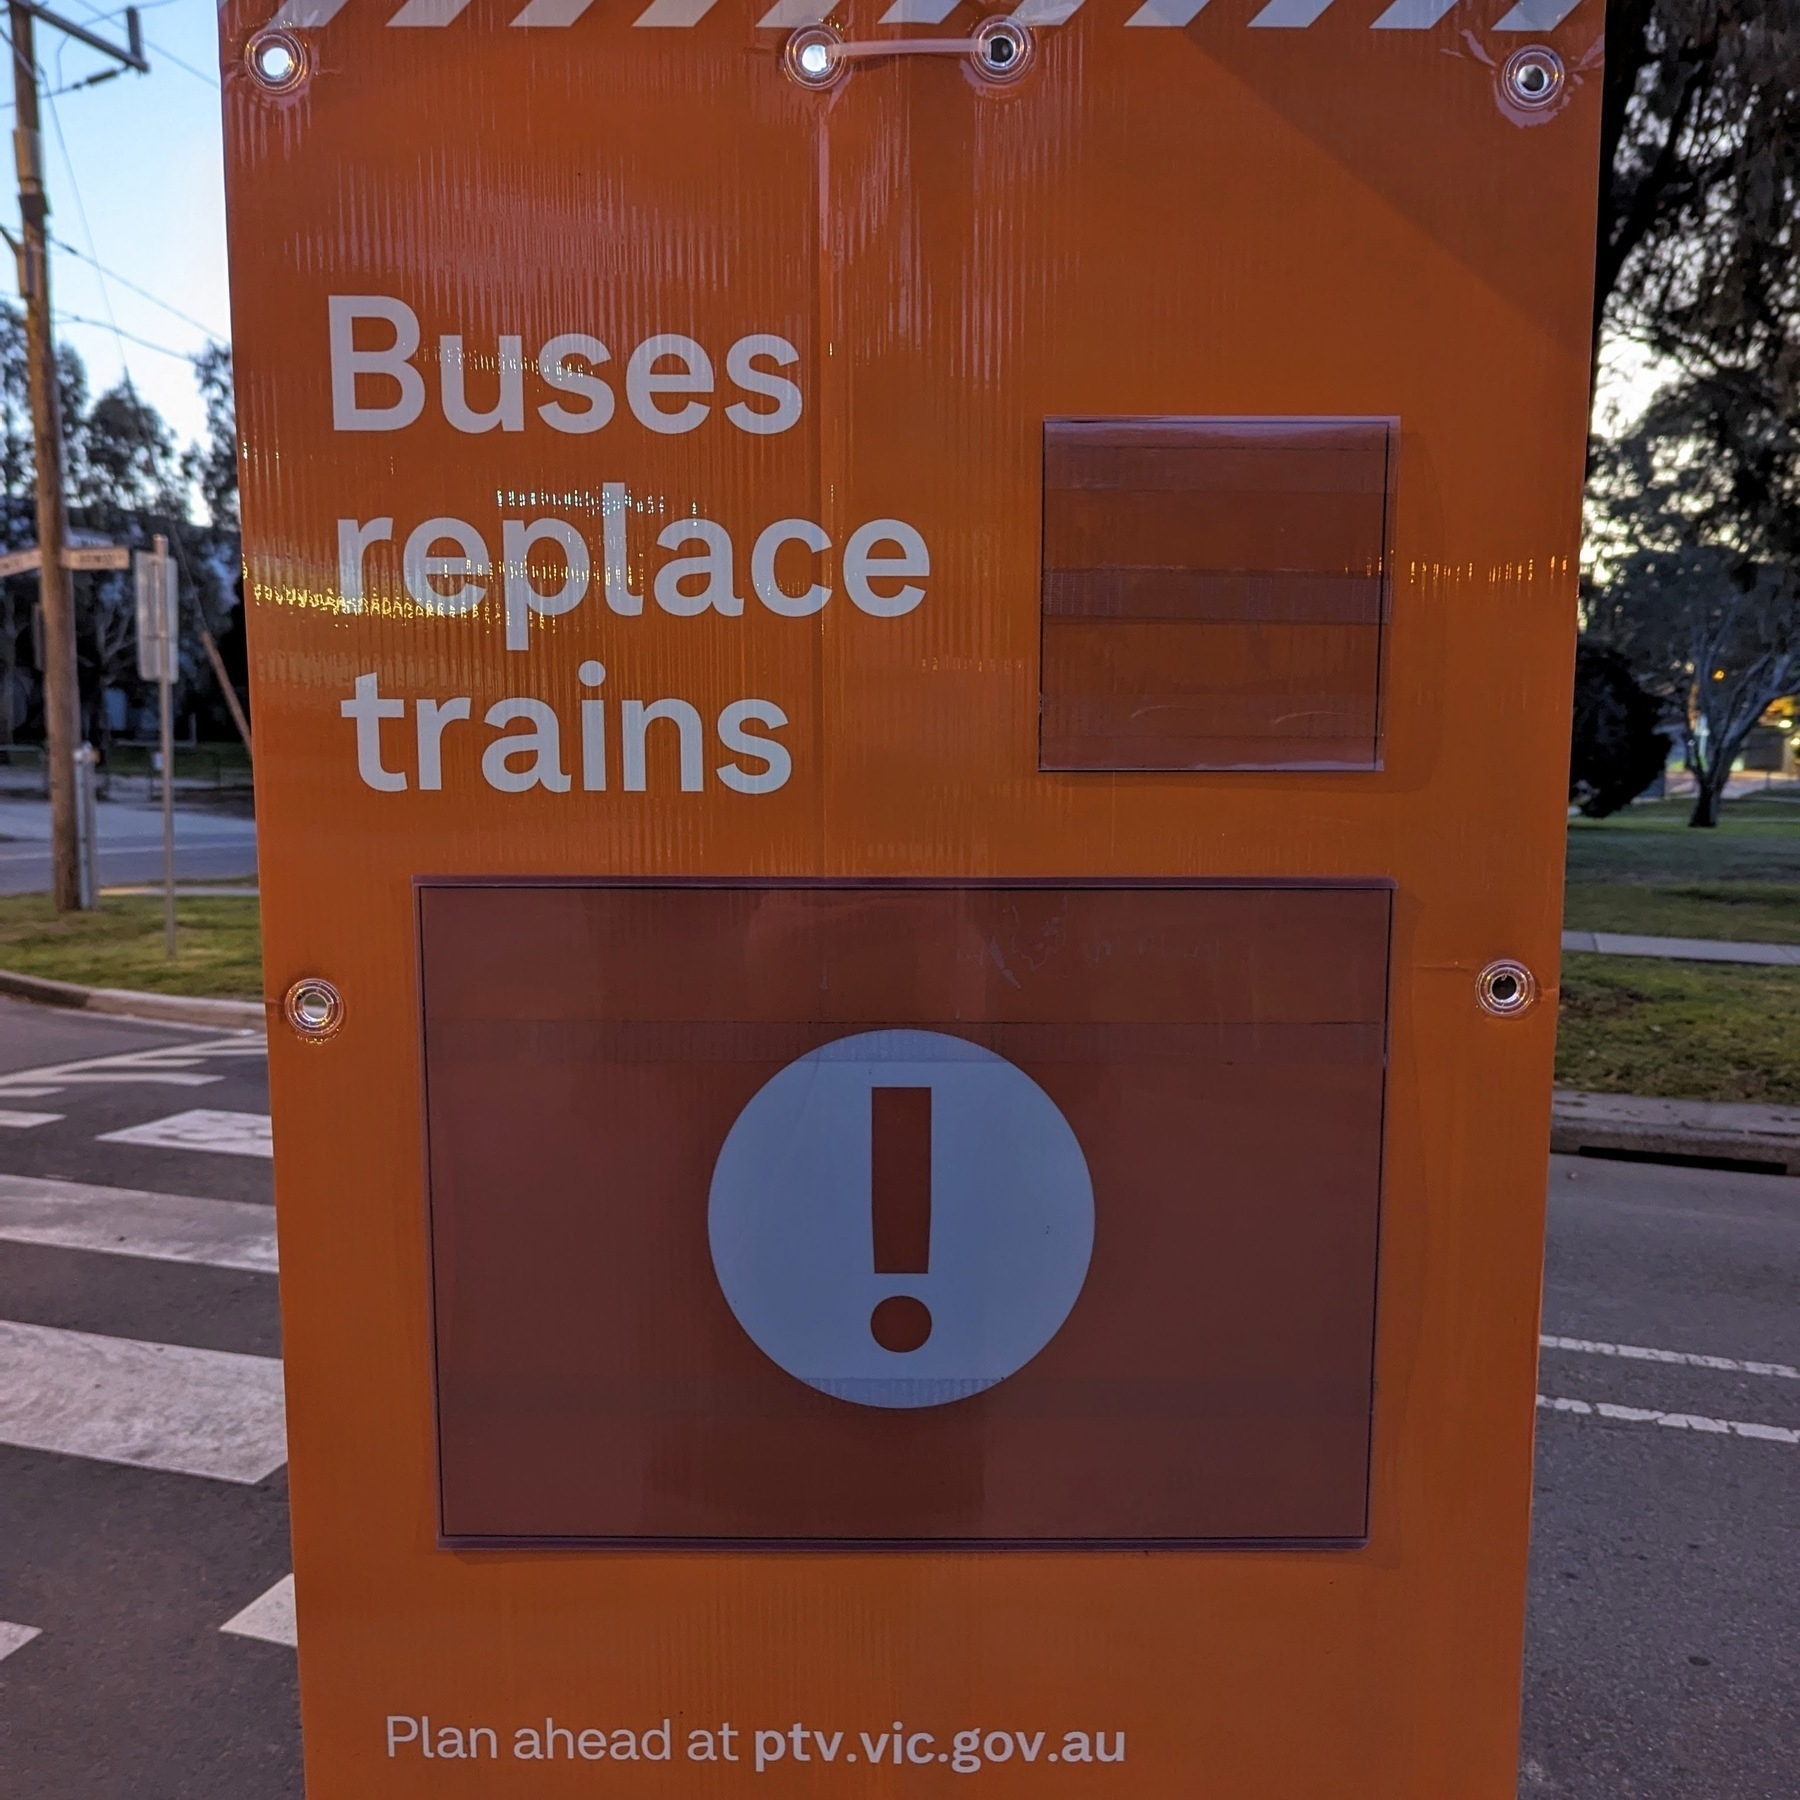 A large orange sign that reads 'Buses replace trains' and then below an exclamation icon reads 'Plan ahead at ptv.vic.gov.au'